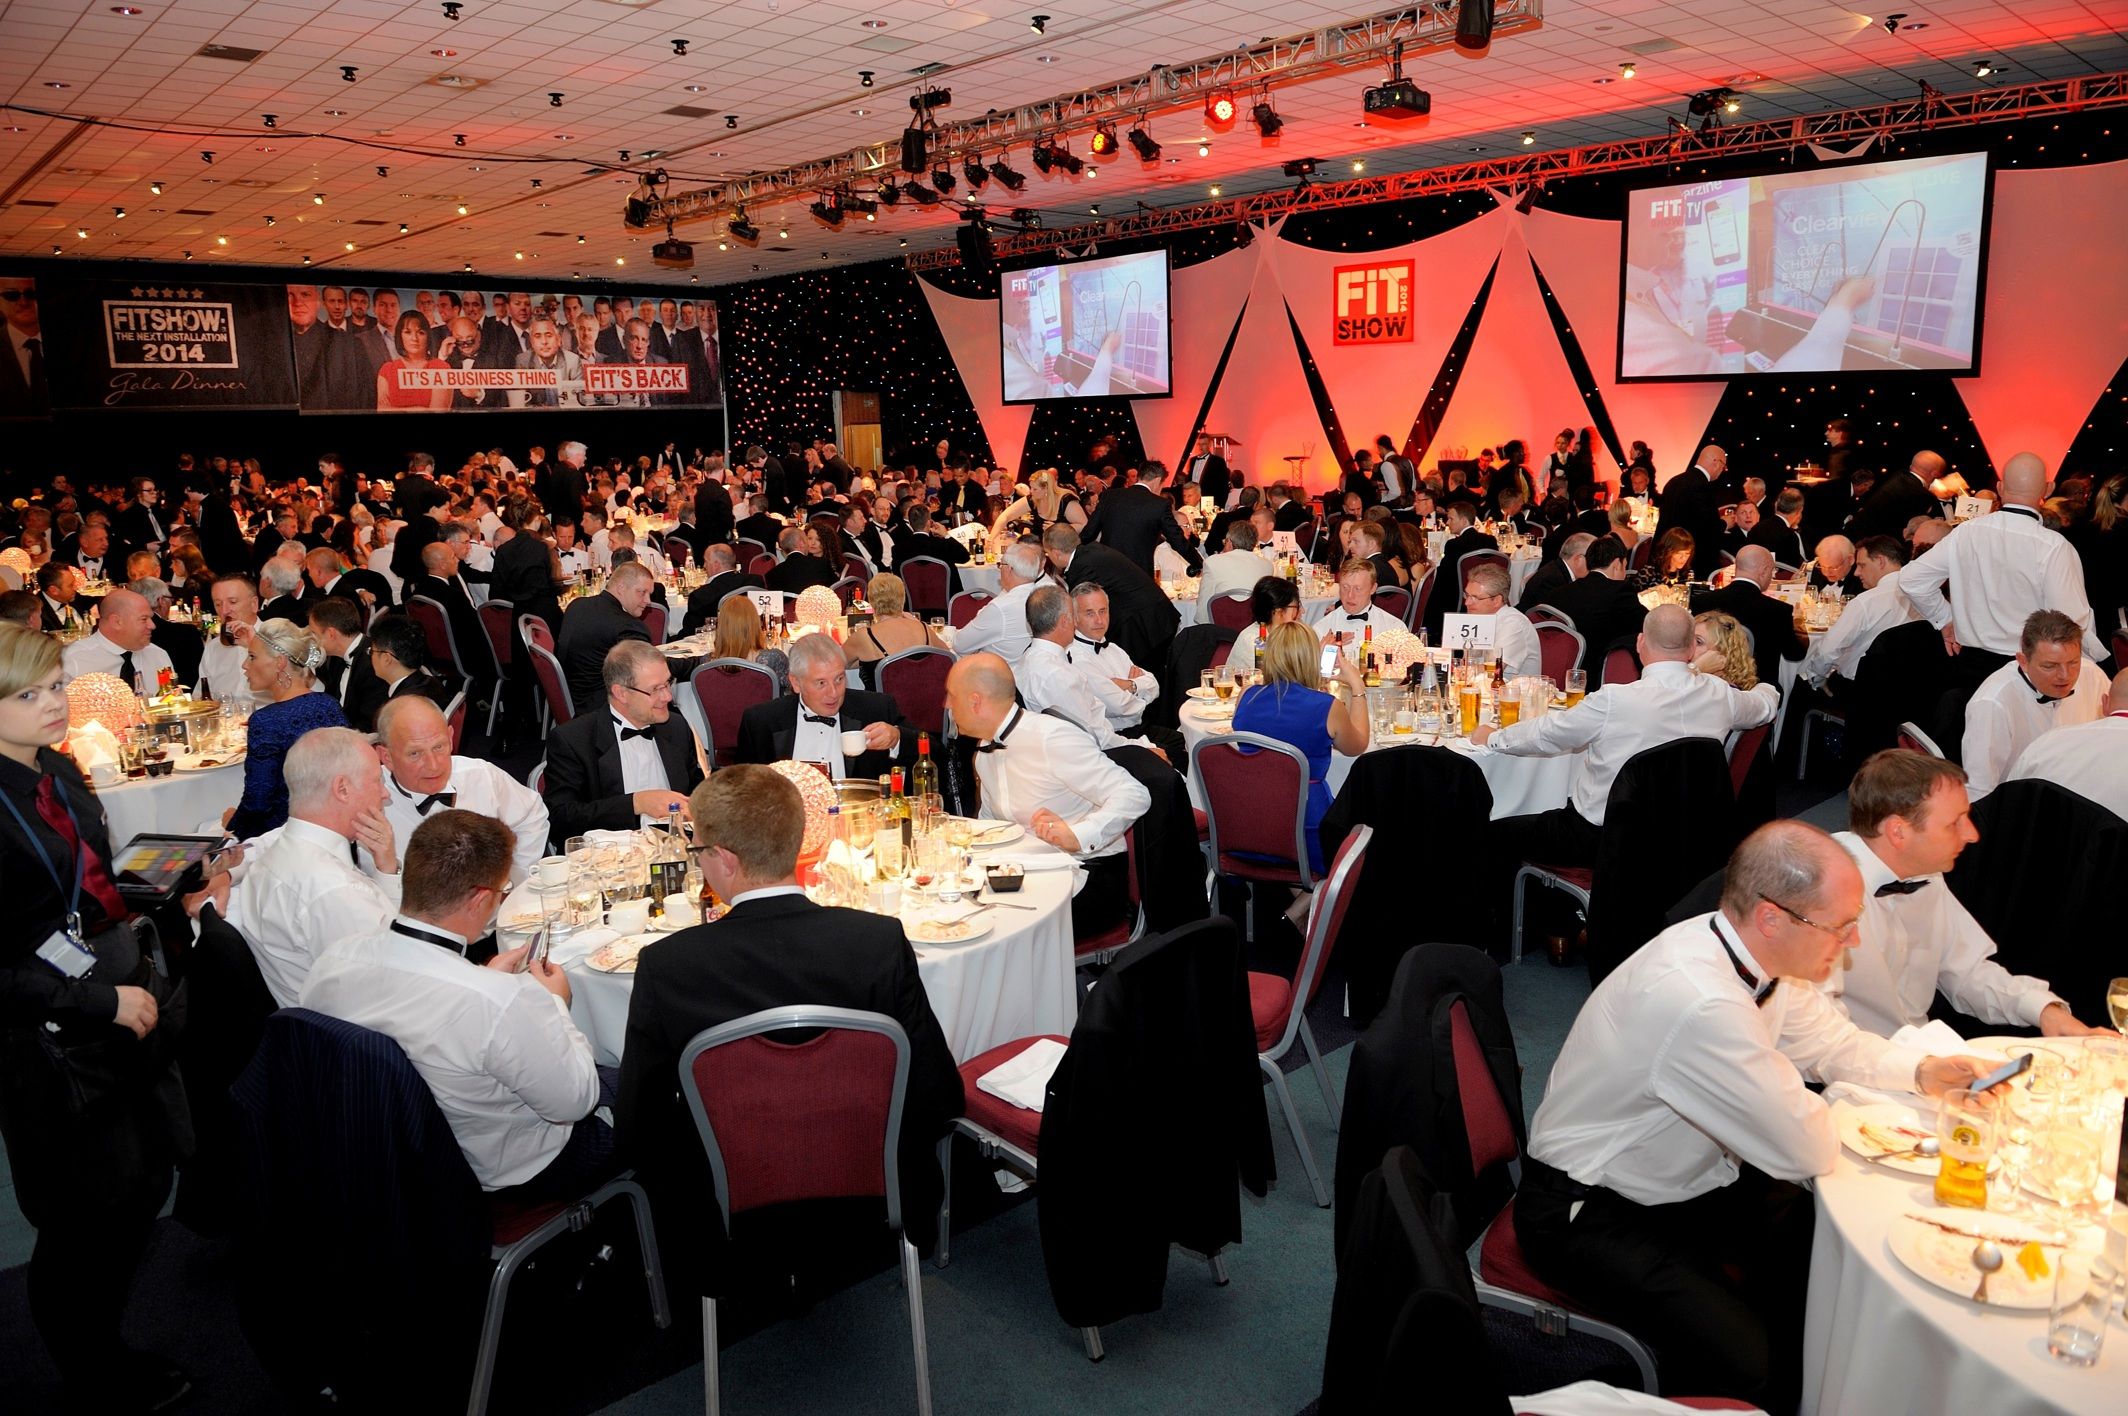 The FIT Show gala dinner 2016 is sold out